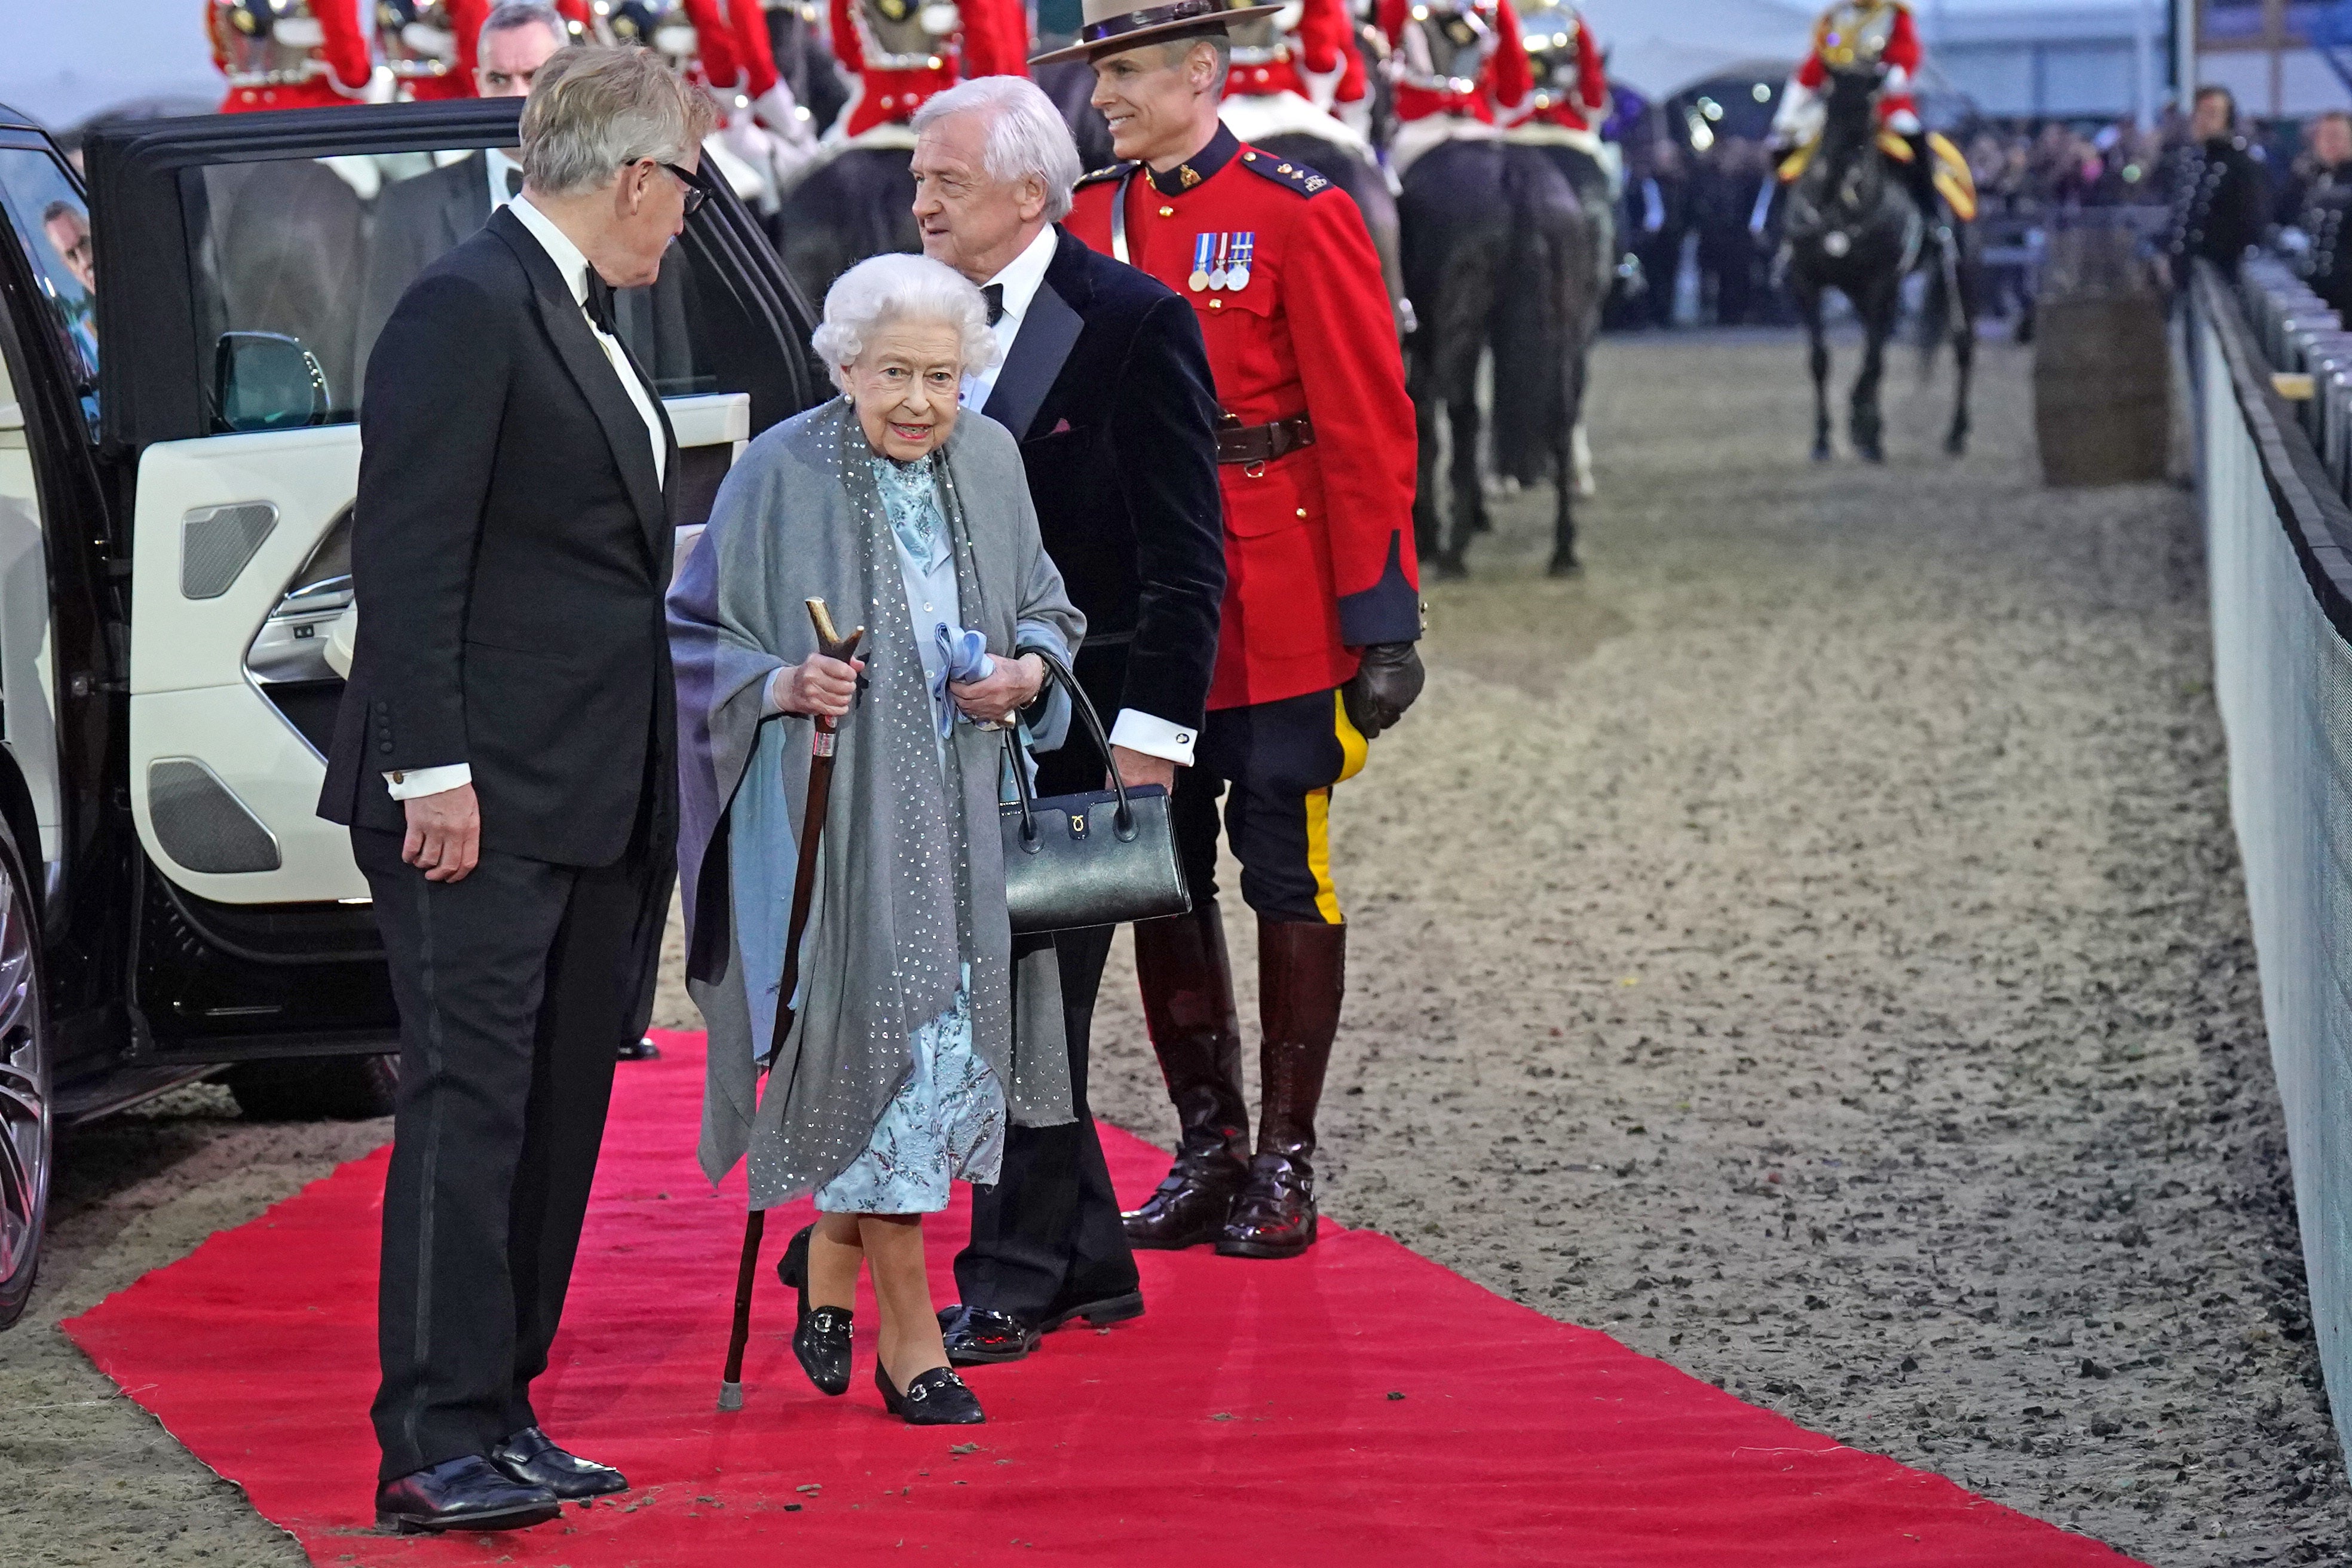 The Queen arrives for the A Gallop Through History Platinum Jubilee celebration at the Royal Windsor Horse Show (Steve Parsons/PA)